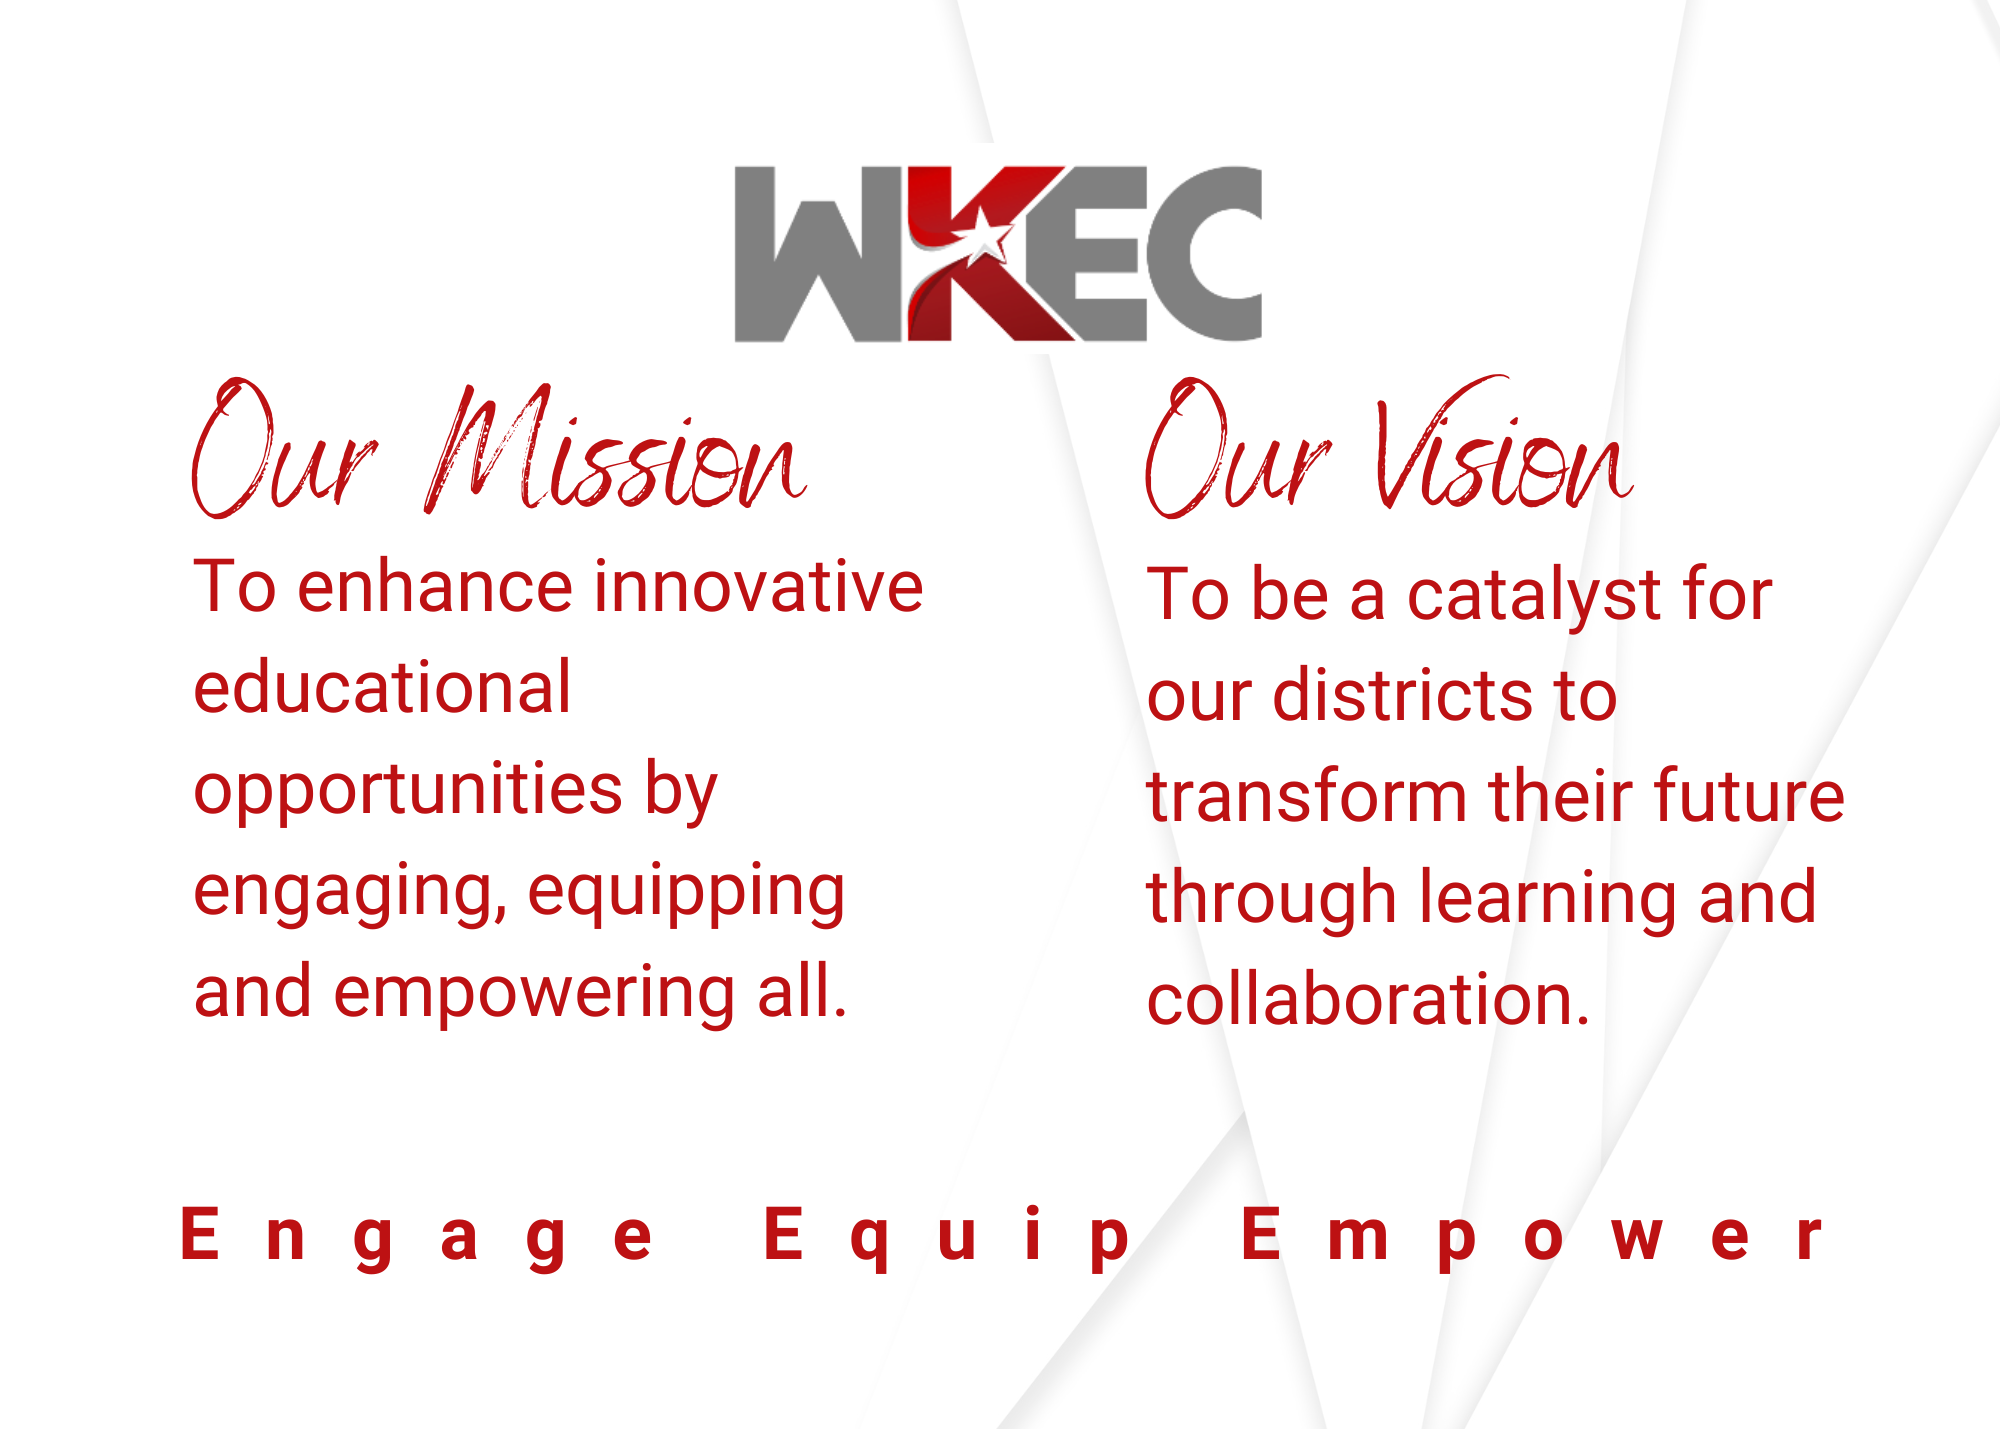 wkec's mission is to engage, equip and empower all